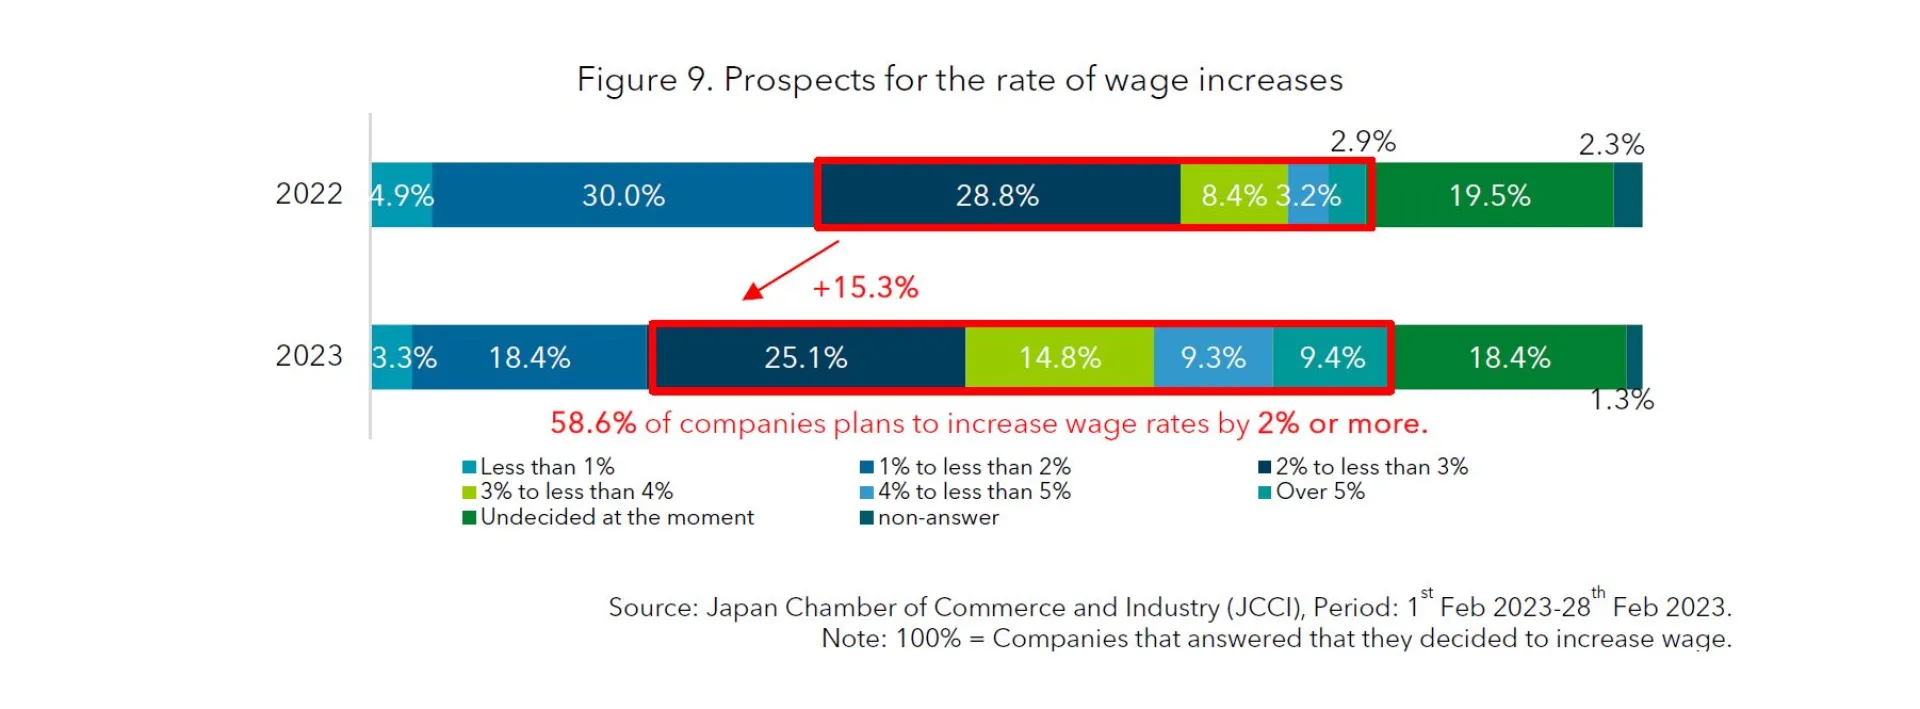 Figure 9 Prospects for the rate of wage increases